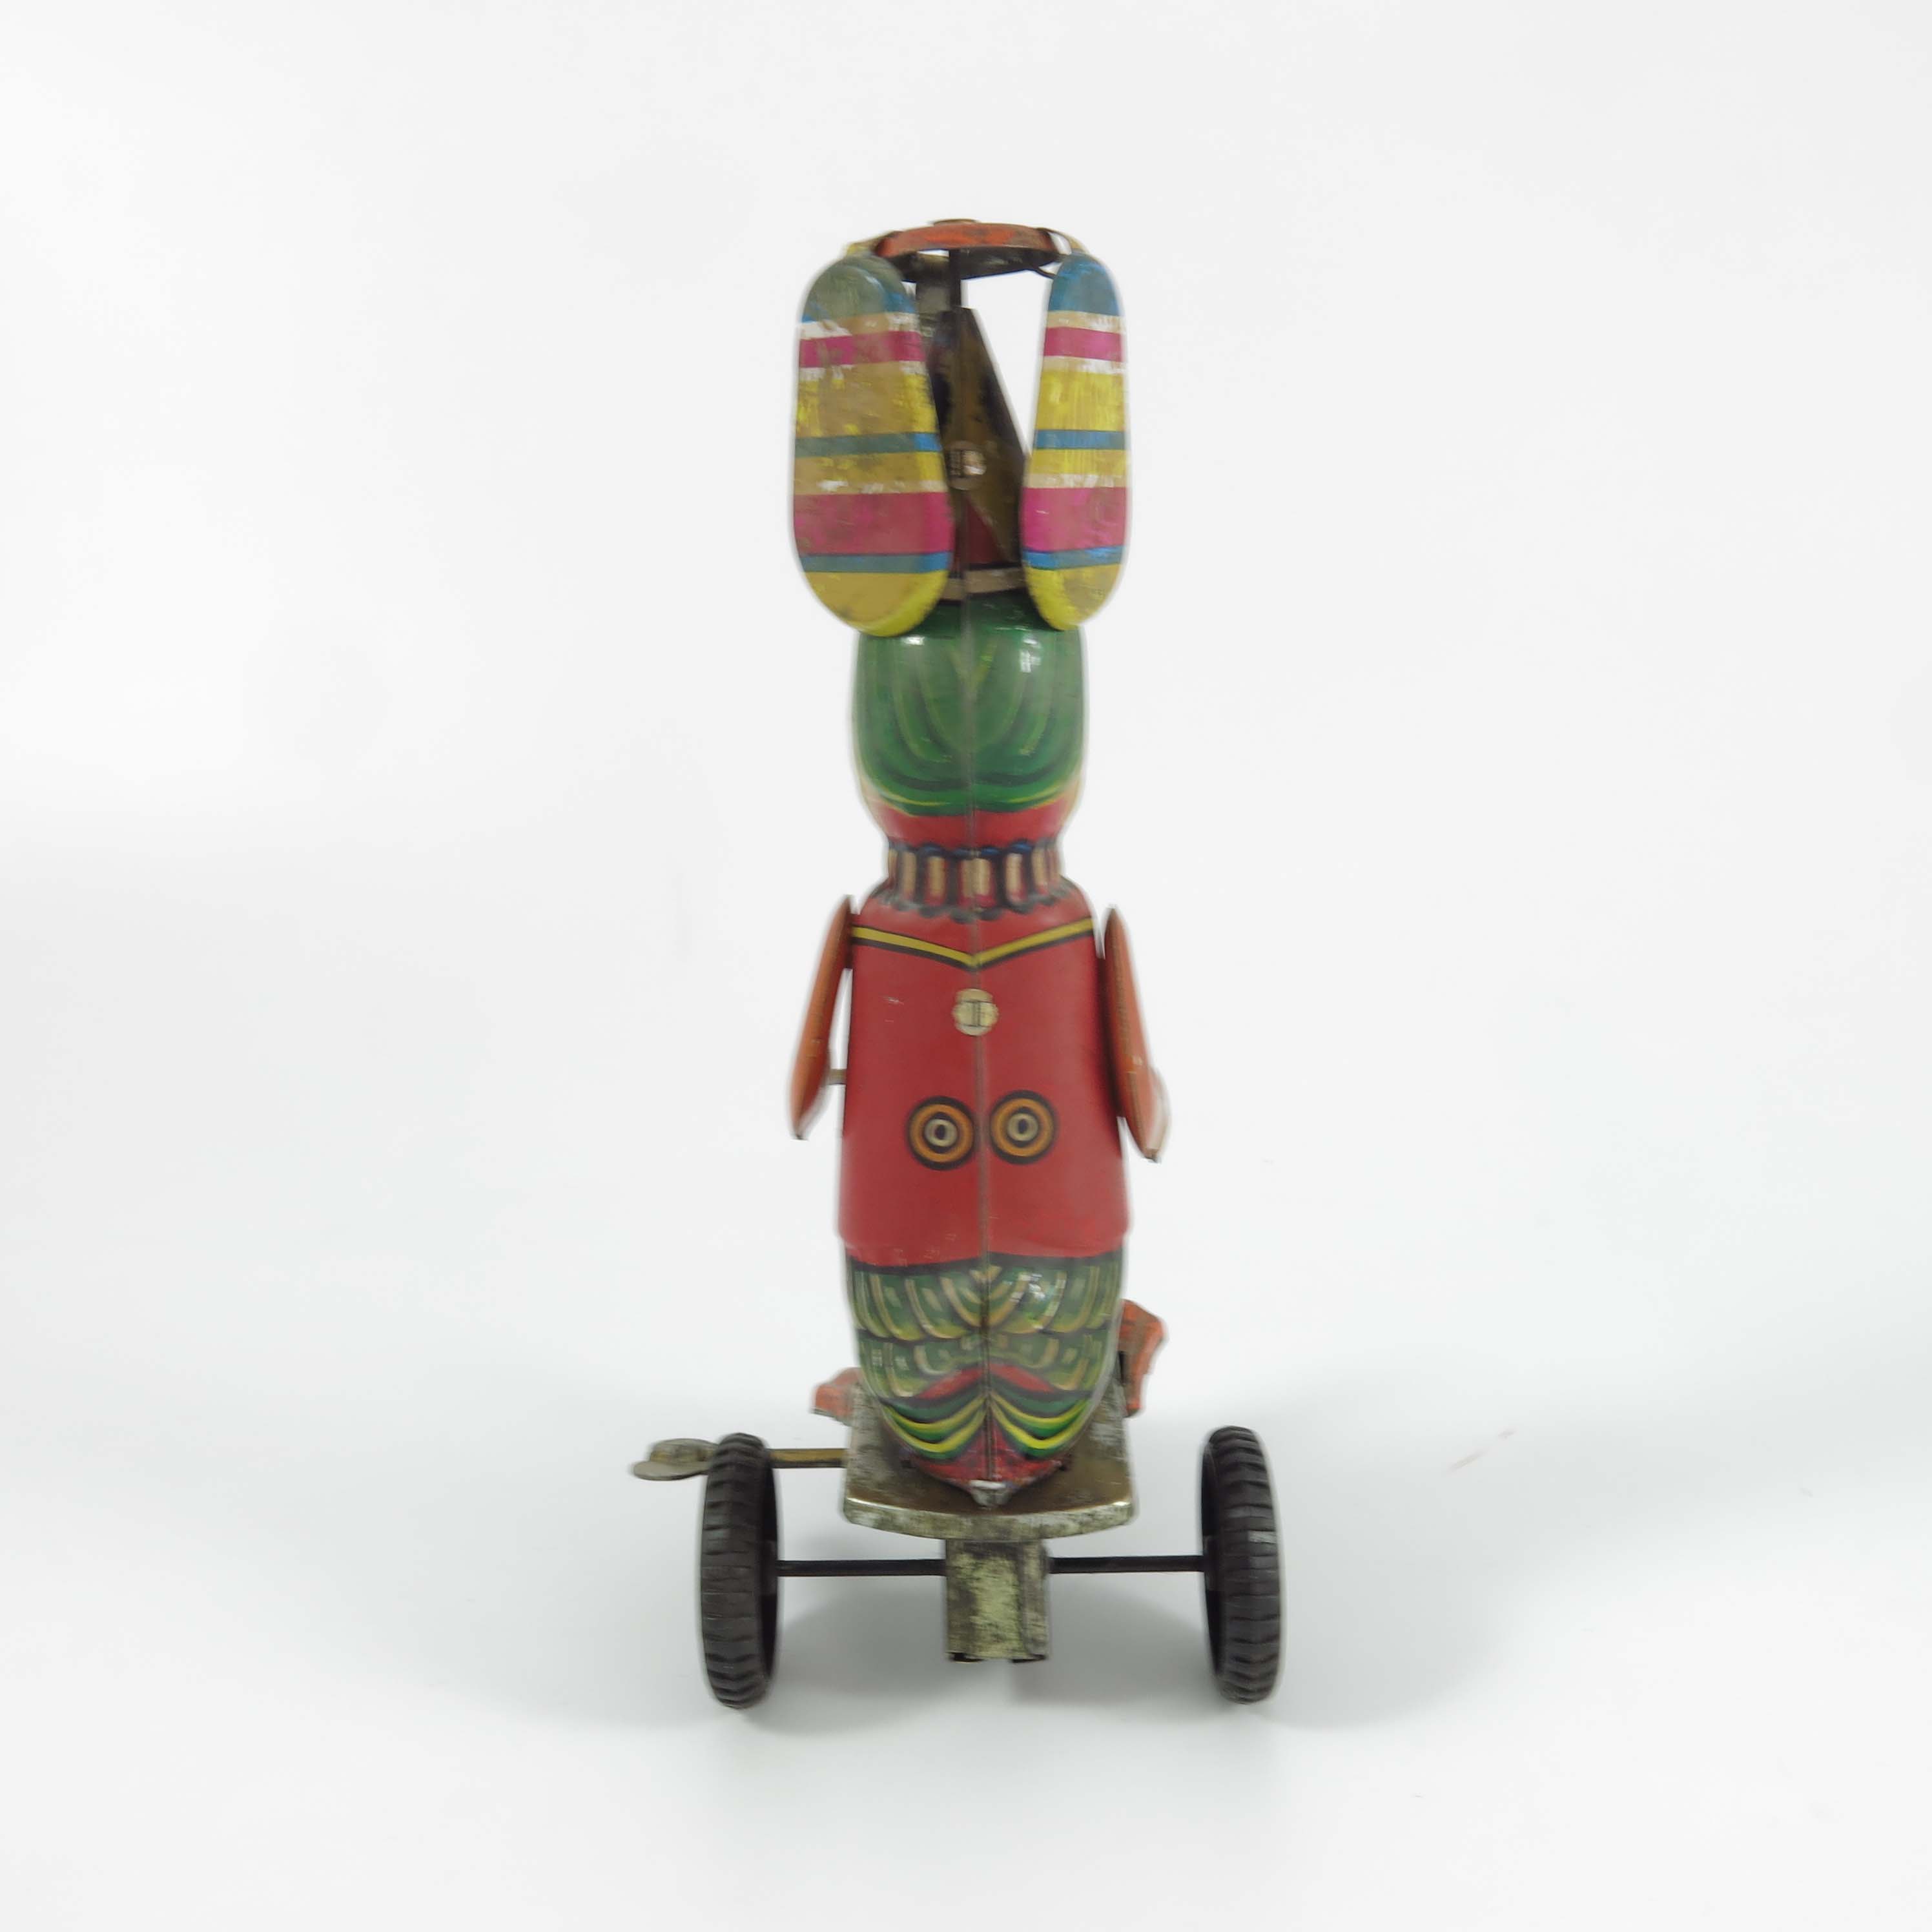 GERMAN CLOCKWORK DUCK ON A TRICYCLE WITH PROPELLER HAT, PROBABLY JW TOYS - Image 3 of 4